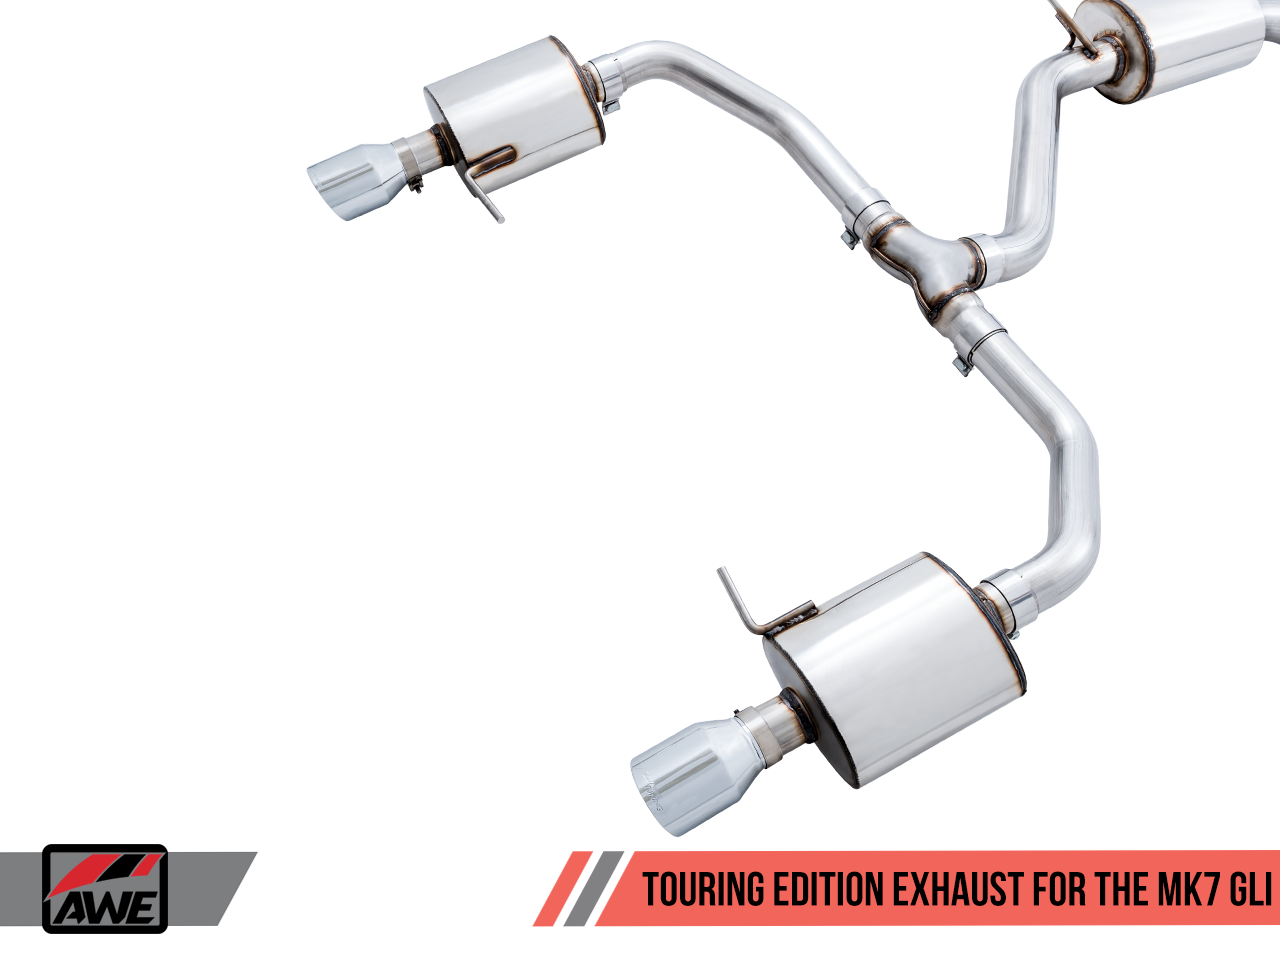 AWE Track Edition Exhaust - Resonated - for MK7 Jetta GLI w/ High Flow Downpipe (not included) - Motorsports LA